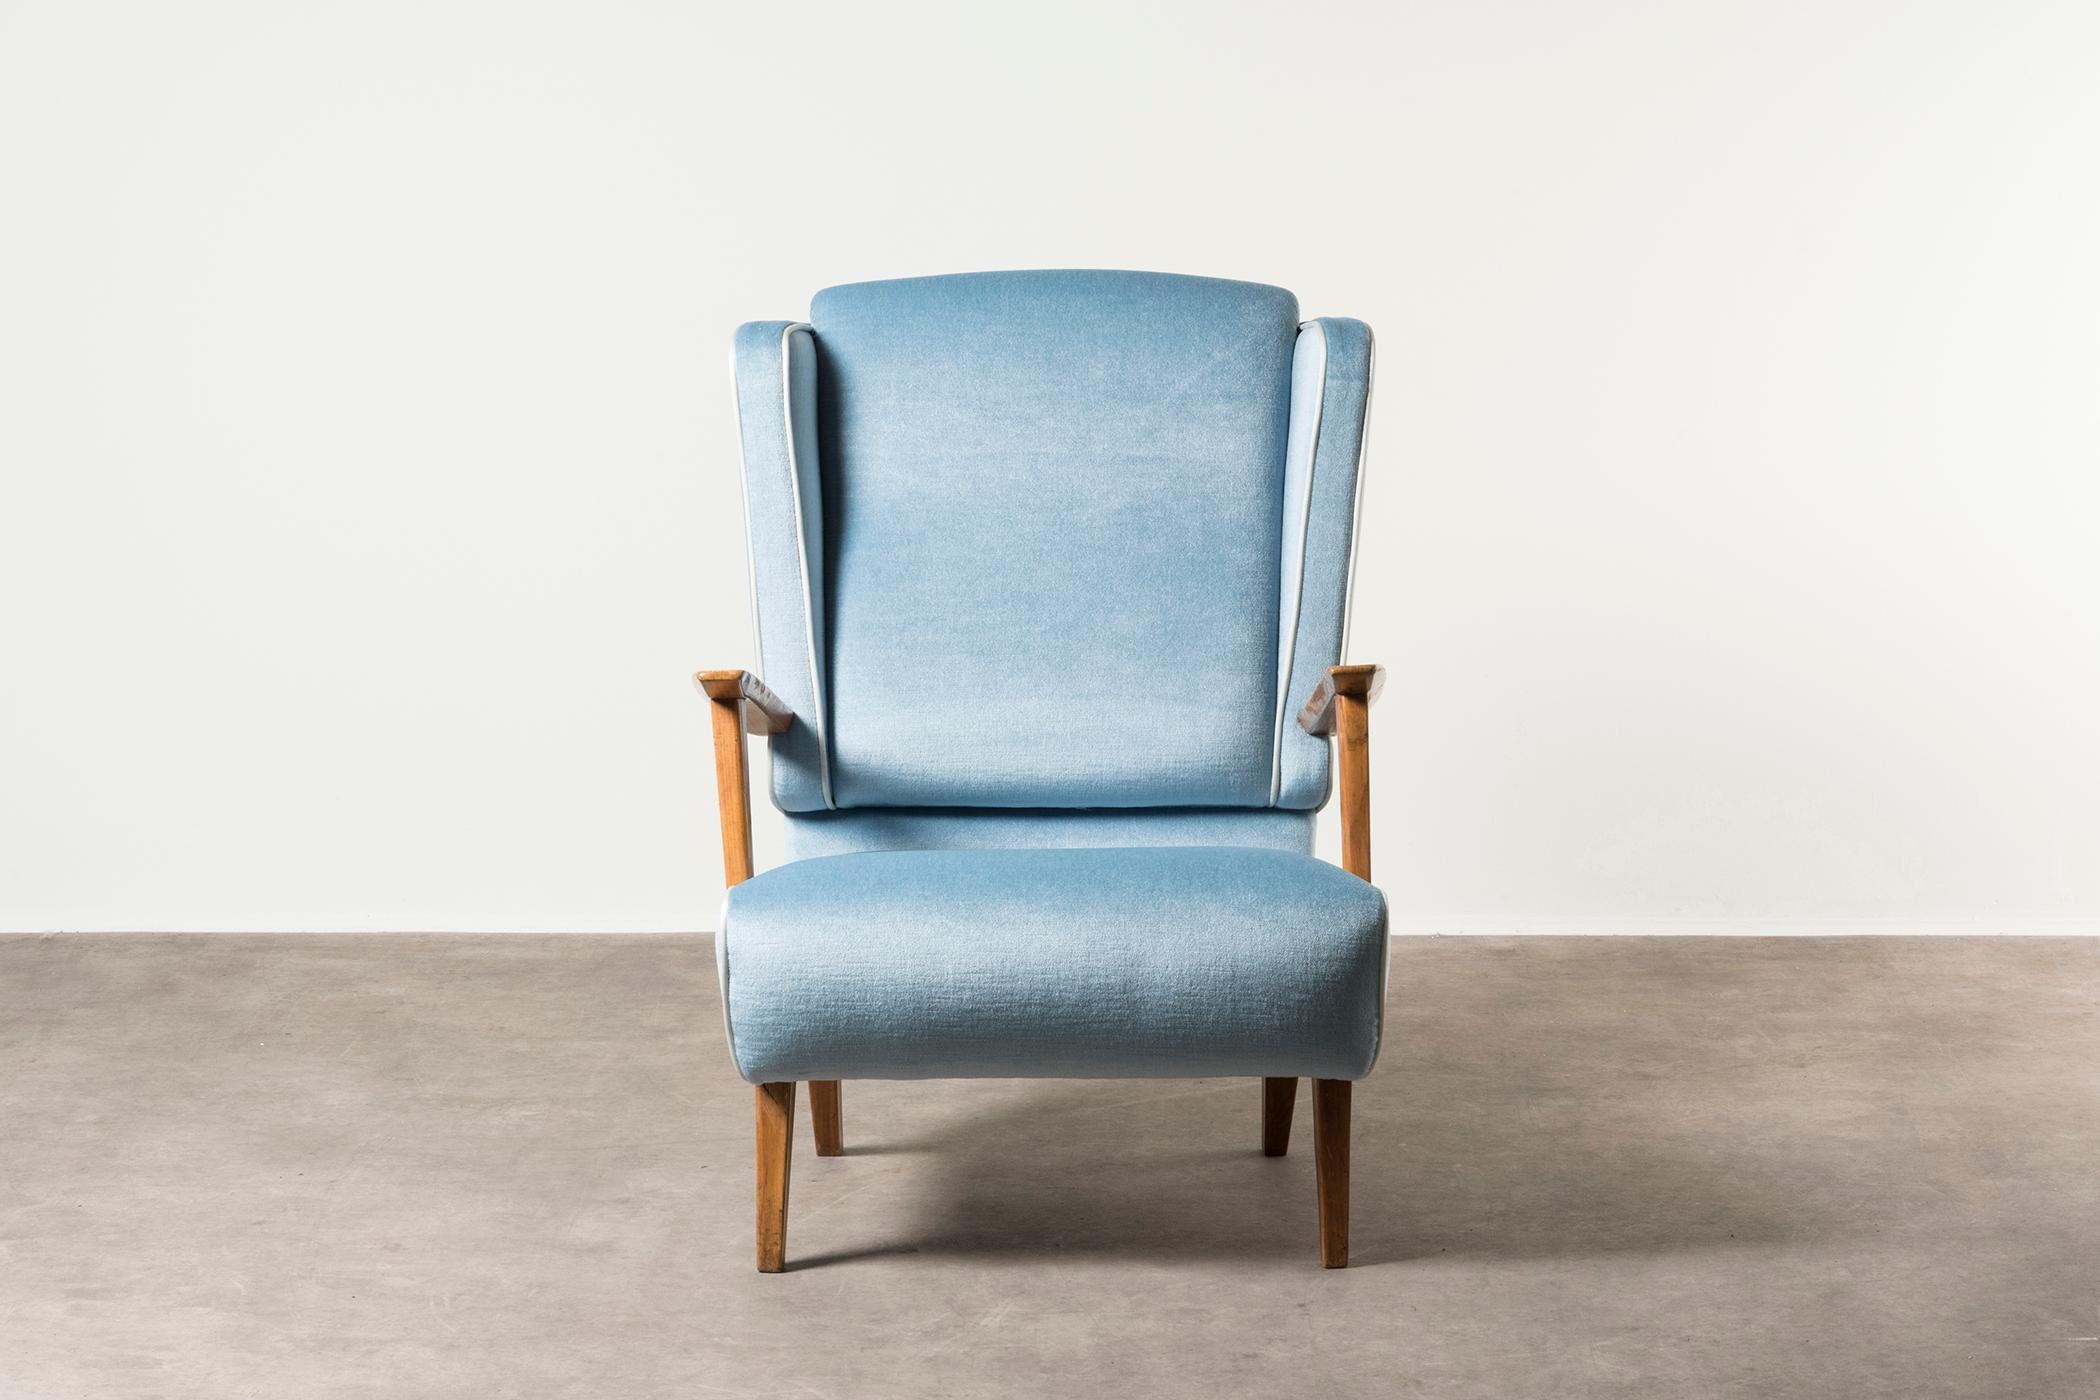 Armchair by Gustavo Pulitzer Finali. Italy, 1956. Designed for the Cristoforo Colombo ship. Ash wood, velvet upholstery. Measures: 65 x 82 x H 93 cm. 25.6 x 32.3 x H 36.6 in.
Please note: Prices do not include VAT. VAT may be applied depending on